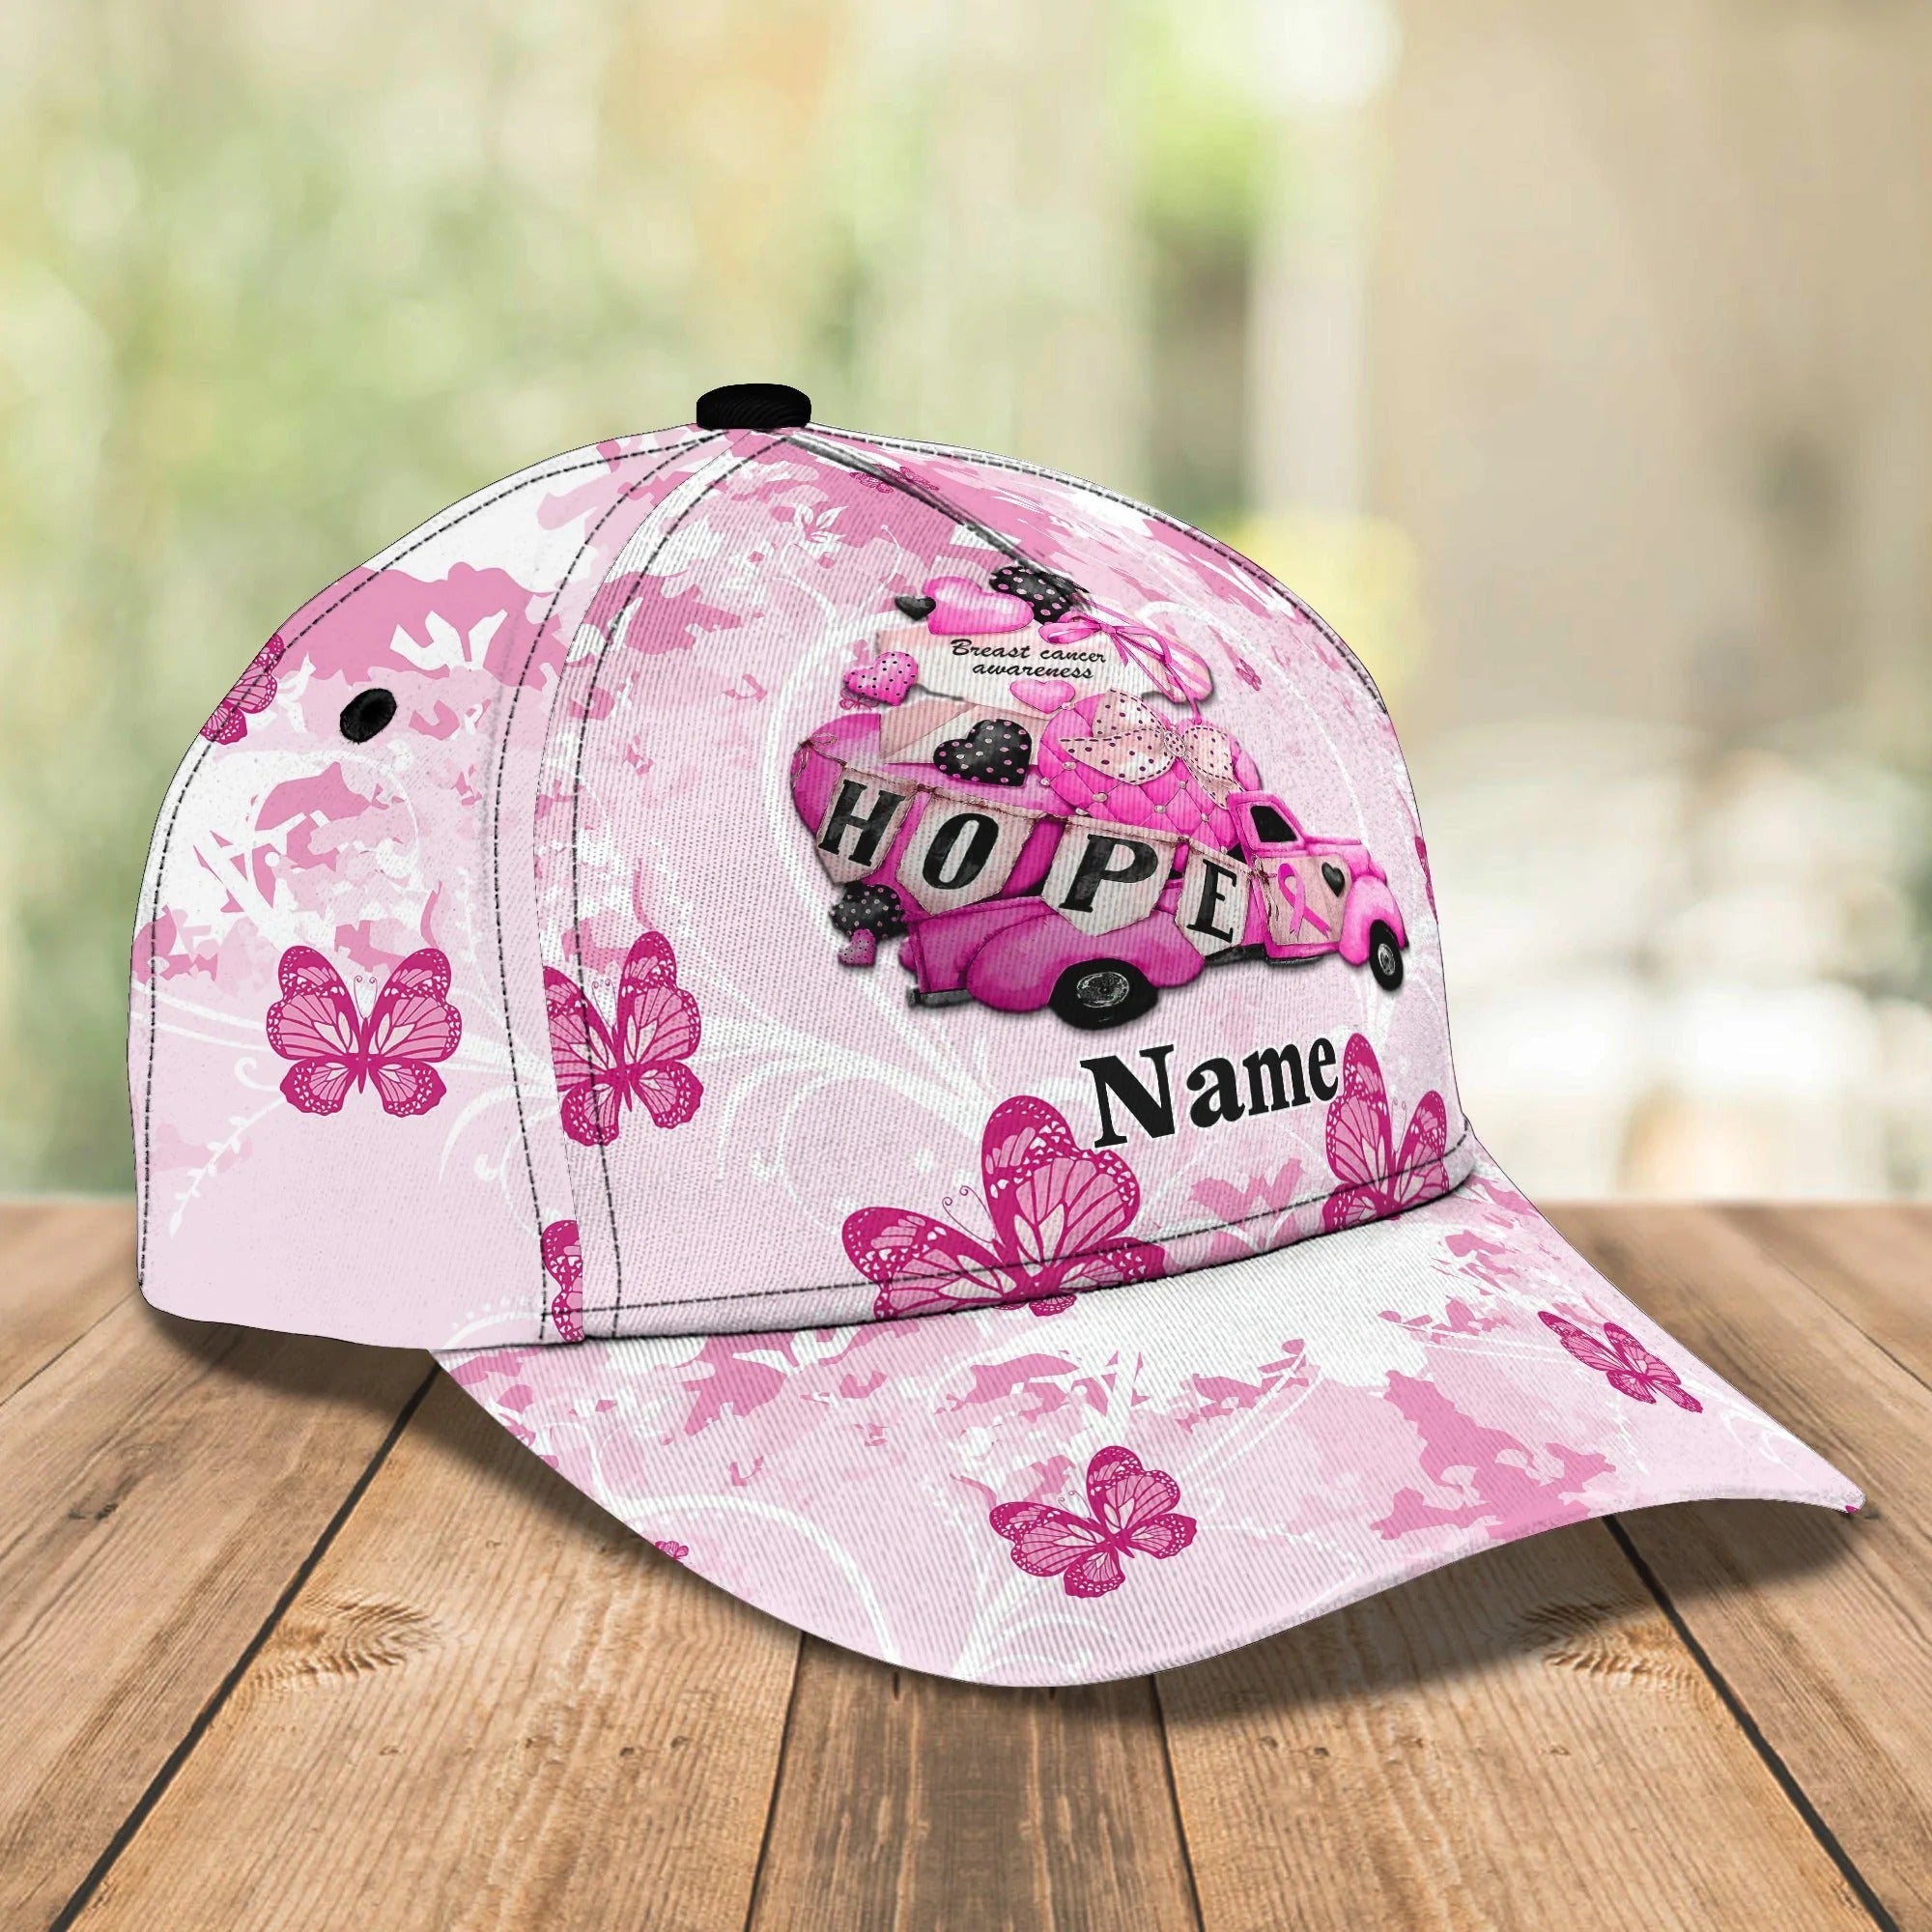 Breast Cancer Awareness Cap Hat/ Butterfly Pink Hope Cap Hat/ Breast Cancer Survivor Gifts